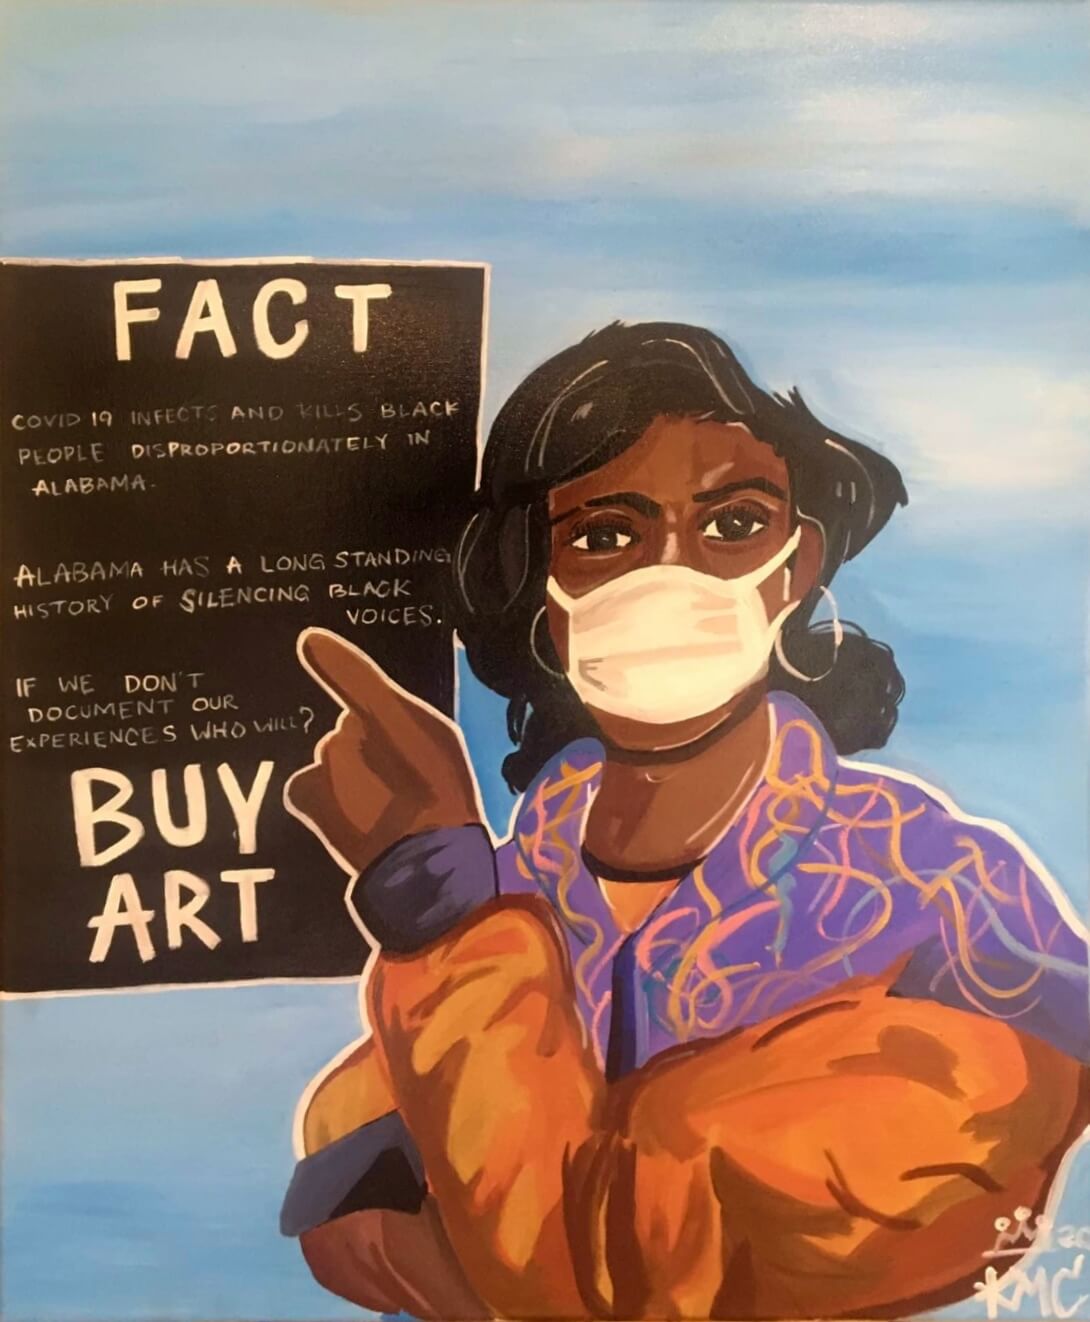 Photograph of a painting by Kerrigan Casey of a Black woman against a blue and white sky. The woman has shoulder length black hair and is wearing a white face mask. She's wearing a puffy orange jacket with purple cuffs; the collar, lapel, and shoulder area of the jacket are also purple and feature colorful yellow and orange squiggles. The woman has her right arm folded under her left arm, which is in the foreground and raised so that her hand is pointing to a black sign behind and to the left of her. At the top of the sign is the word "FACT" hand printed in large white capital letters. Three sentences in smaller handwritten white text fill the middle of the sign. The first sentence reads, "COVID 19 infects and kills Black people disproportionately in Alabama." The second sentence reads, "Alabama has a long standing history of silencing Black voices." The third sentence reads, "If we don't document our experiences who will?" "BUY ART" is hand printed in large white capital letters at the bottom of the sign.